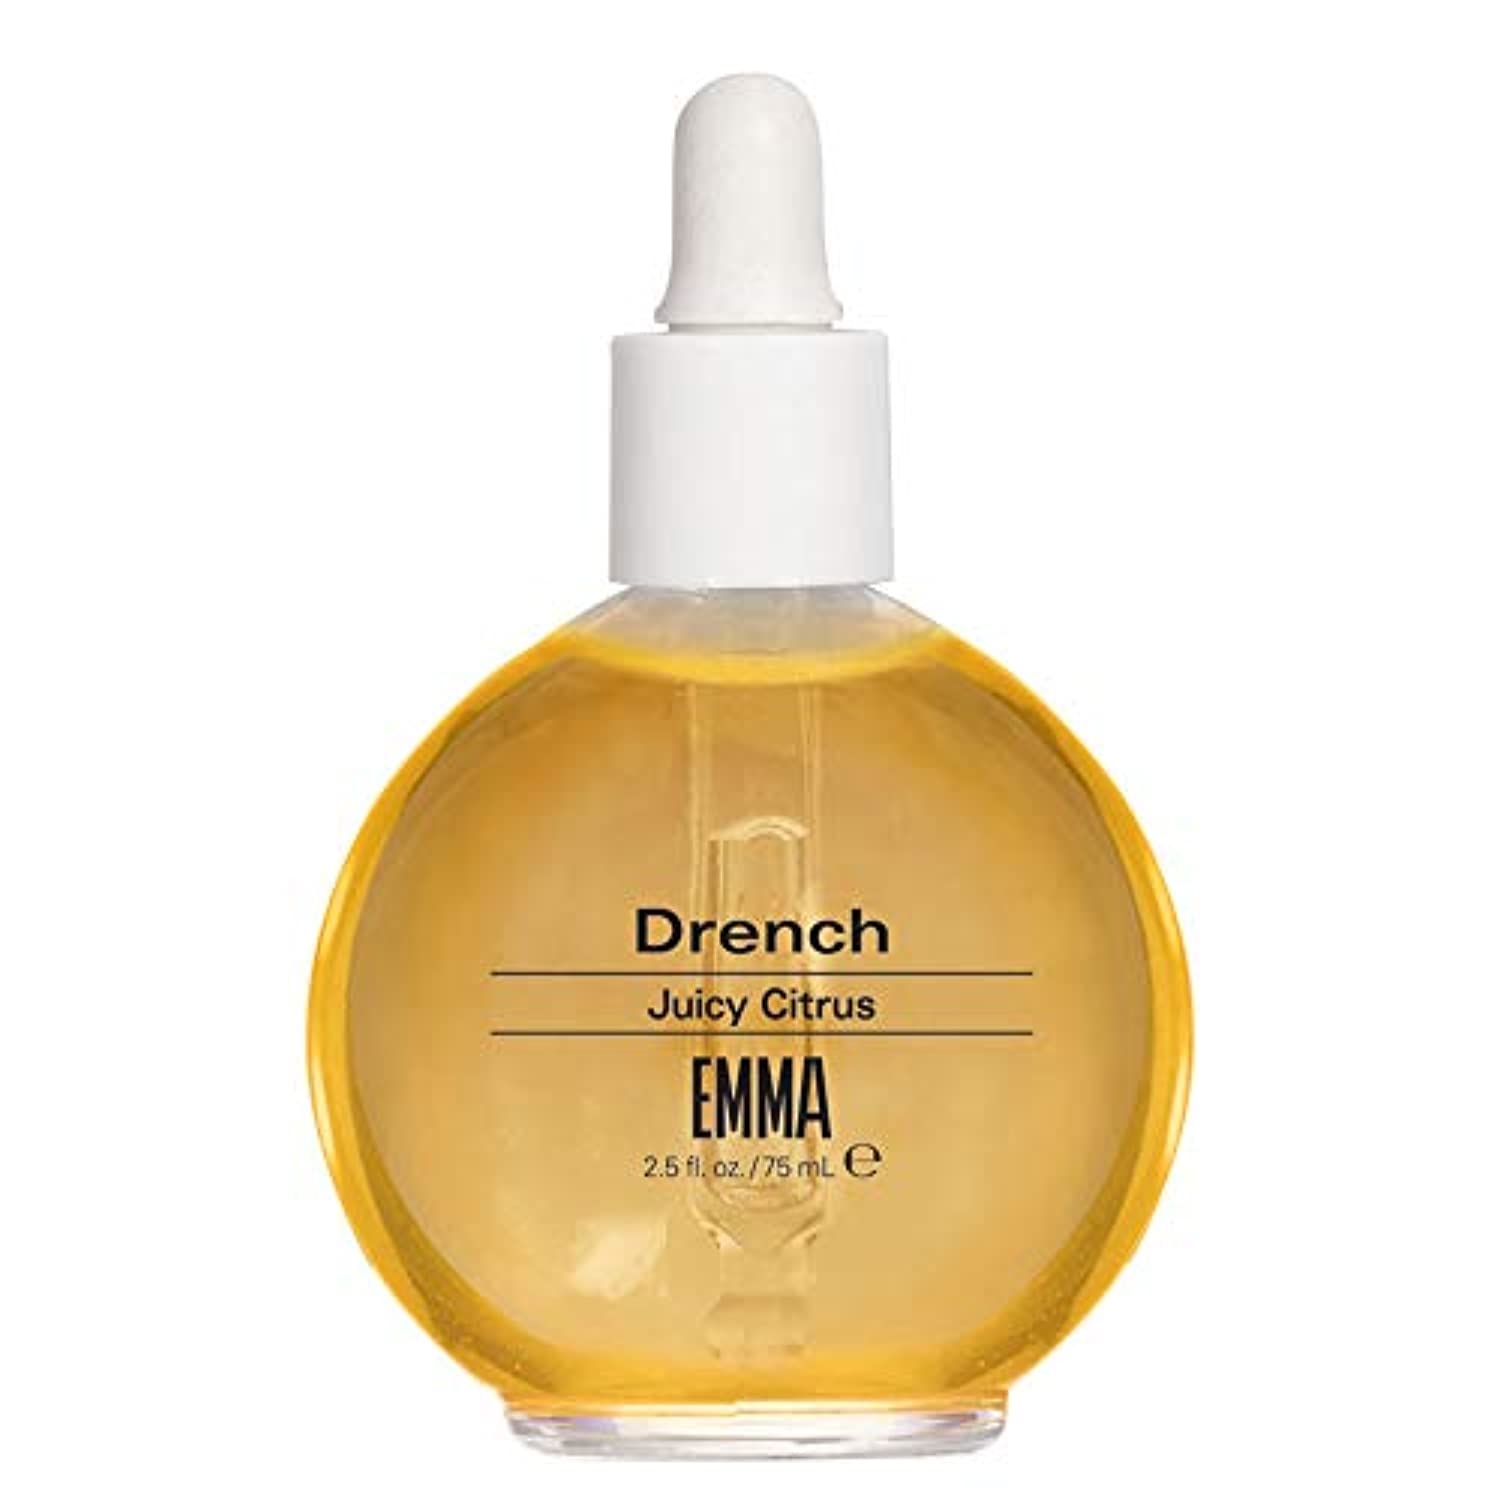 EMMA Beauty Drench Juicy Citrus, Cuticle Oil, 12+ Free Treatment Vegan & Cruelty-Free, Deep Penetrating Oil Nourishes, Protects, Hydrates & Revitalizes Nails & Cuticles With Natural Ingredients, 2.5 O